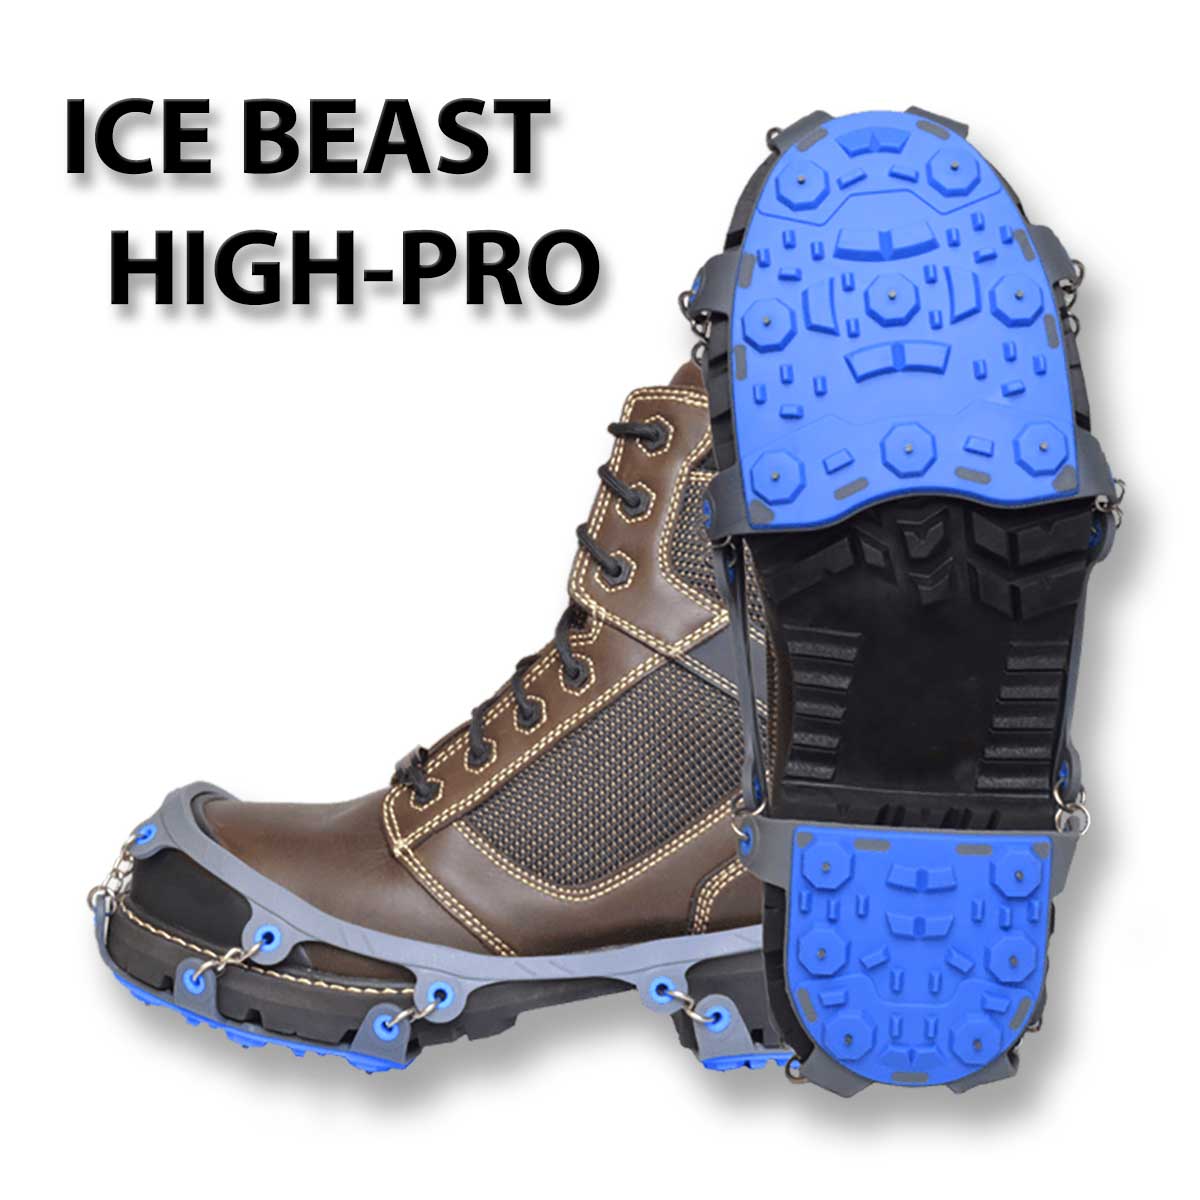 Winter Walking ICE BEAST HIGH-PRO Ice Cleats for Shoveling Snow